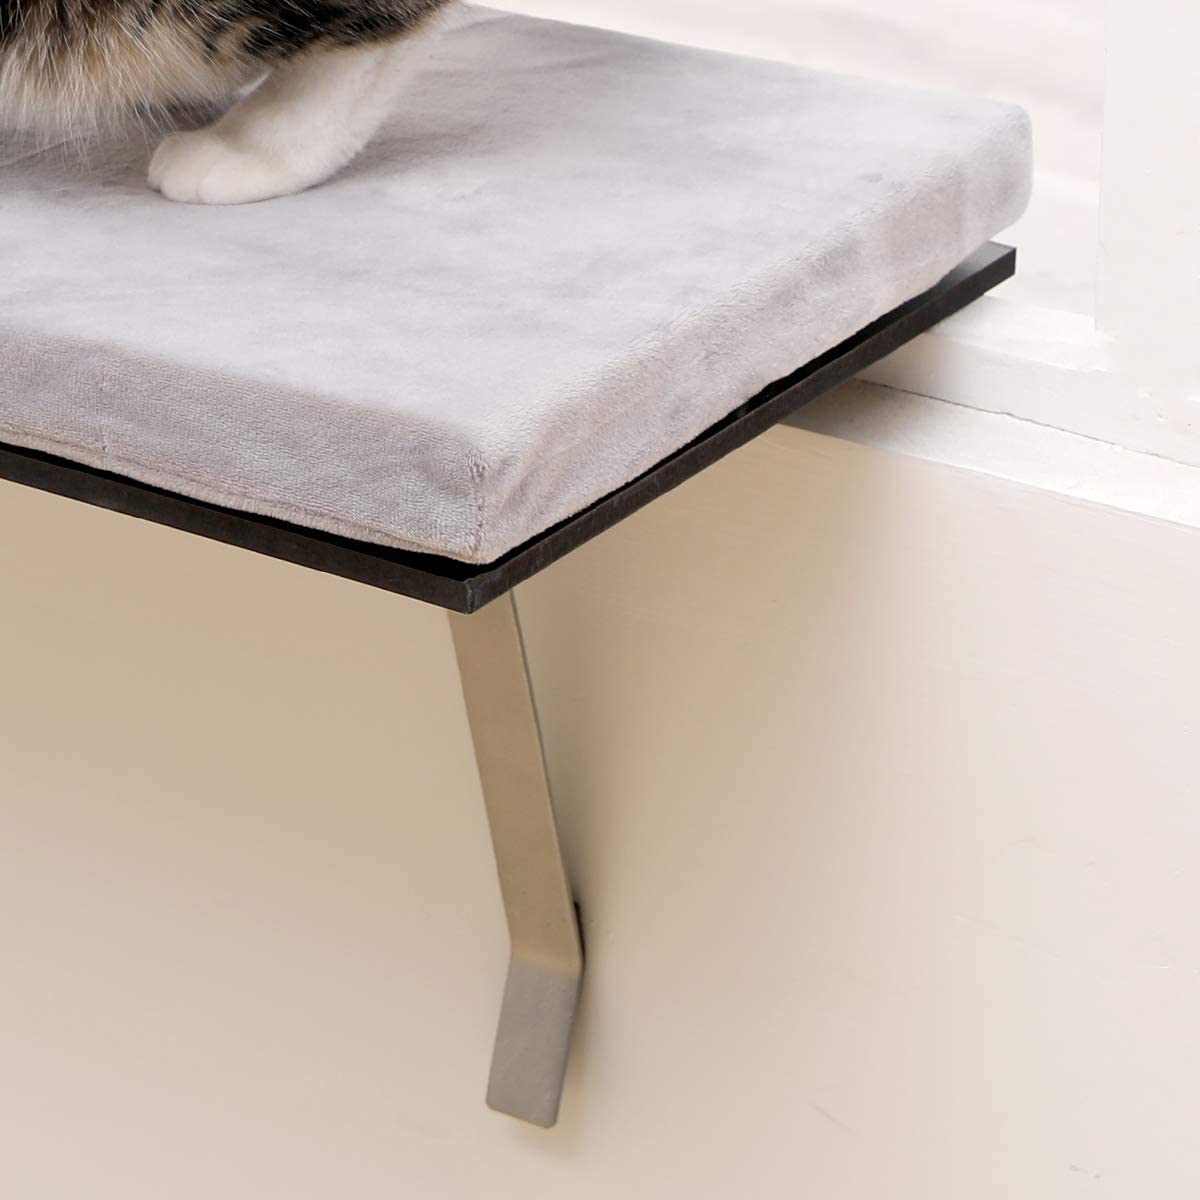 Look Out Window Cat Bed （Gray fabric)